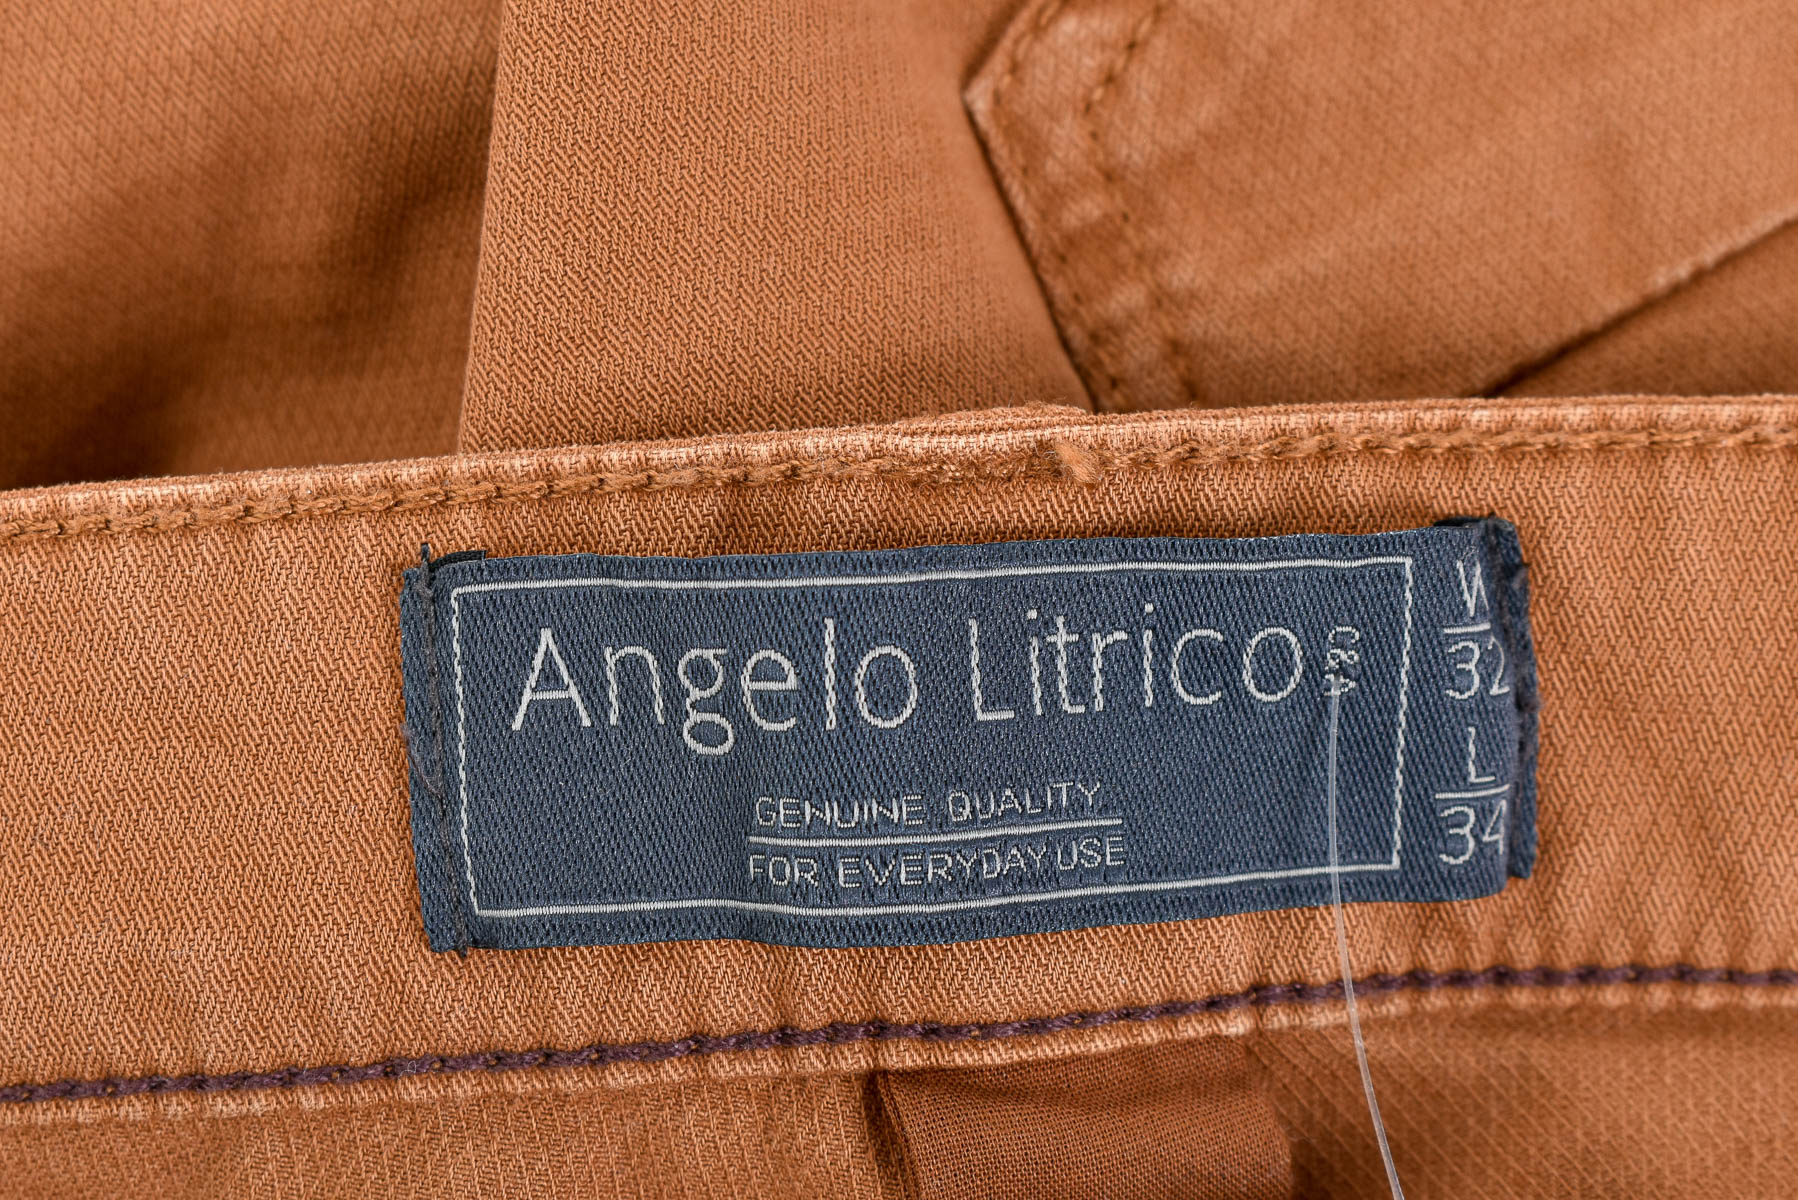 Men's trousers - Angelo Litrico - 2